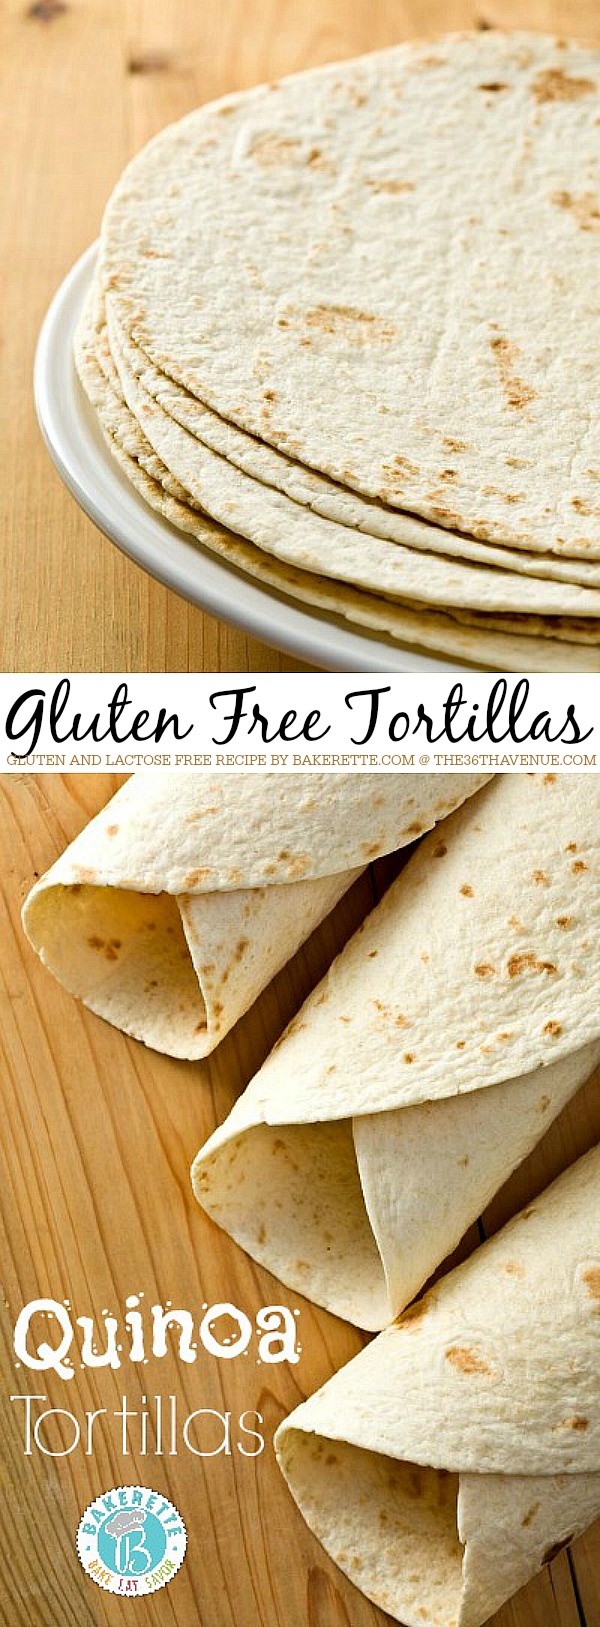 These quinoa tortillas are not only made with a superfood, but they are flexible and strong enough to hold your filling. Gluten Free. Lactose Free. Bakerette.com